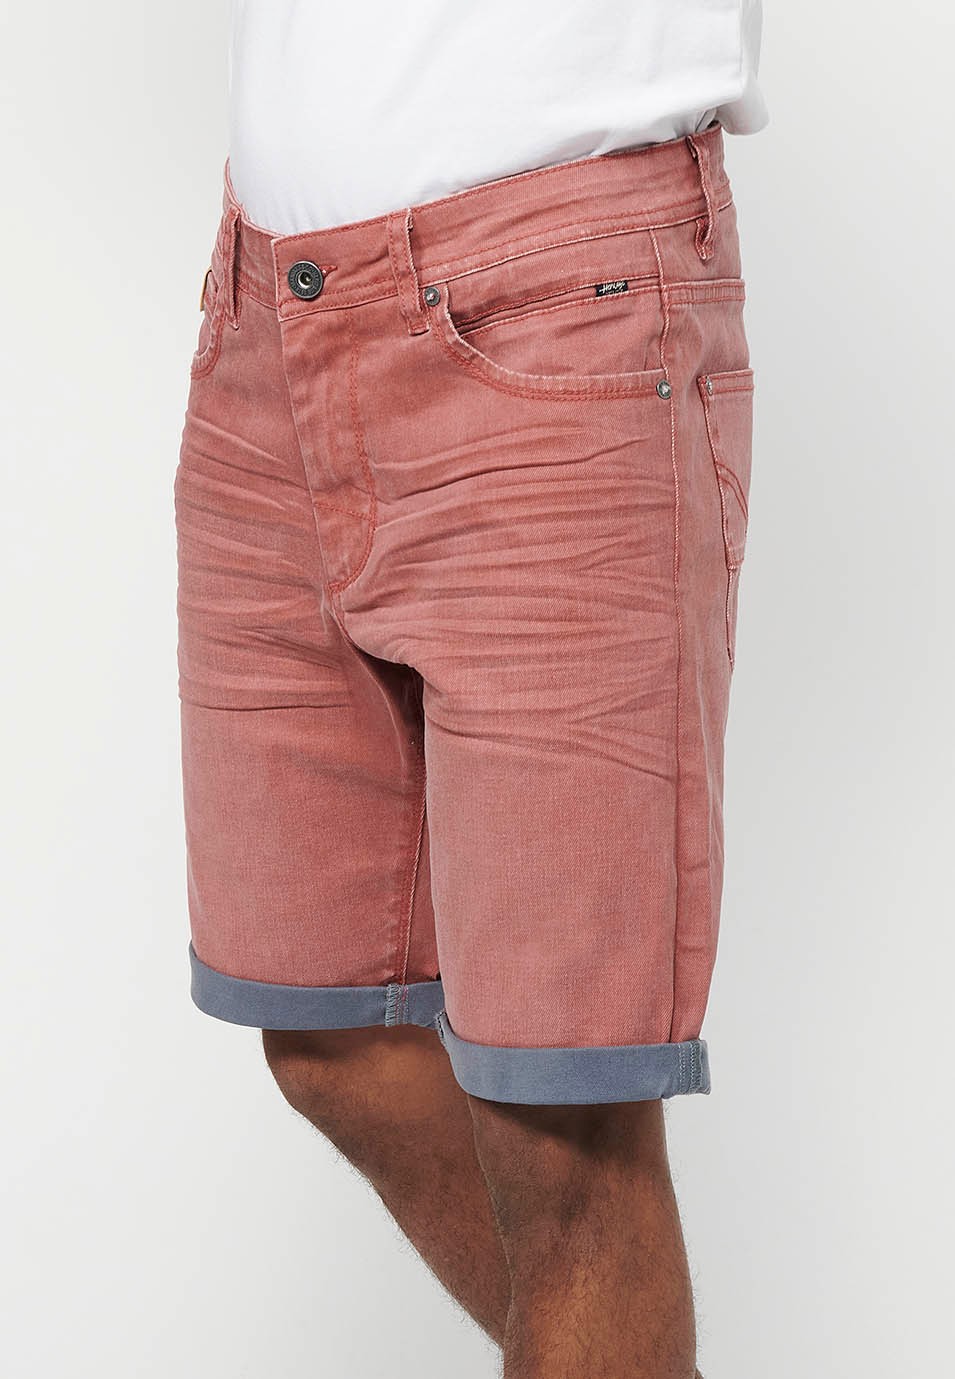 Denim Bermuda shorts with turn-up finish, front closure with zipper and button with five pockets, one pocket in Maroon Color for Men 3